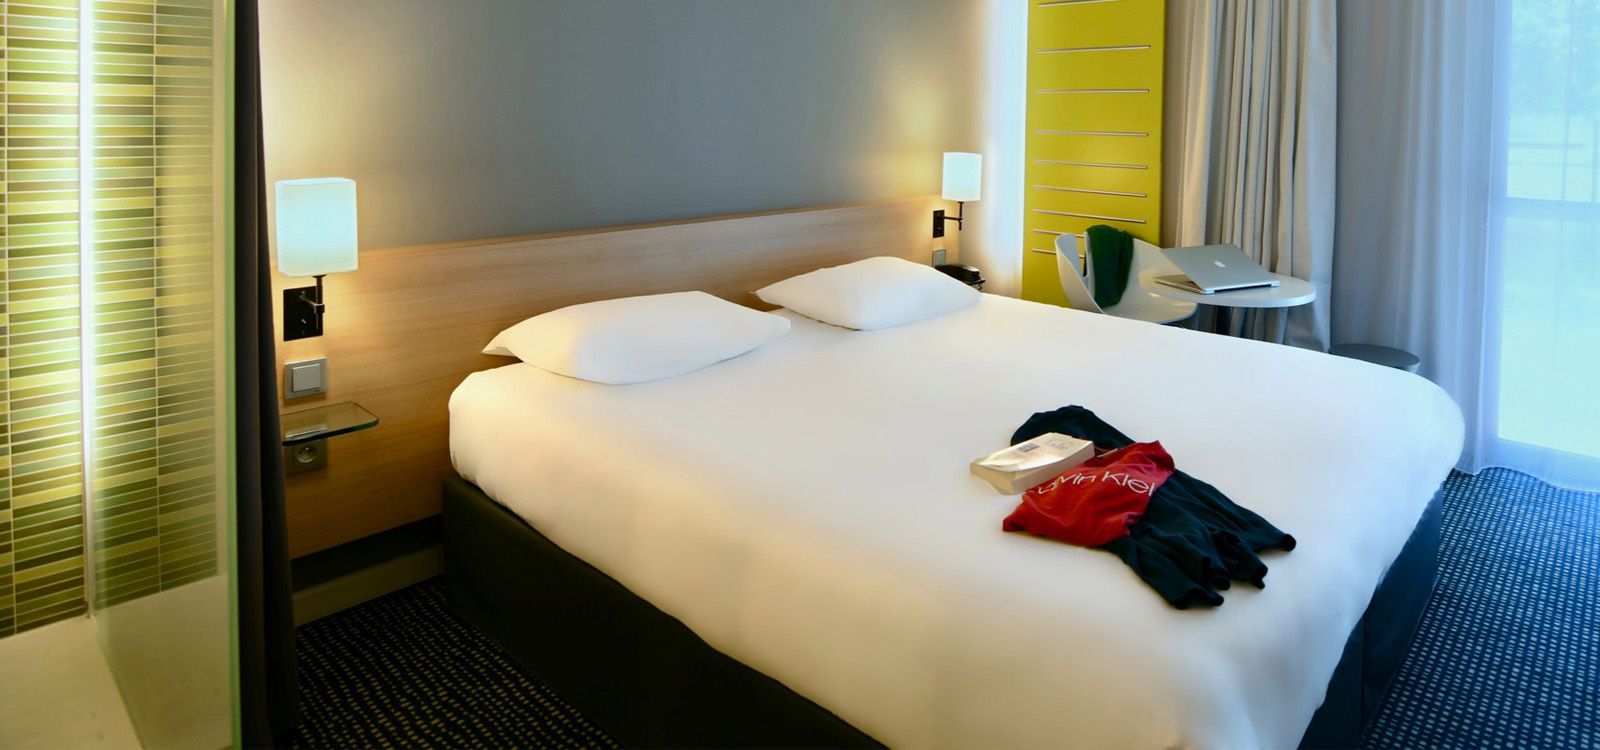 Chambre double Ibis Styles